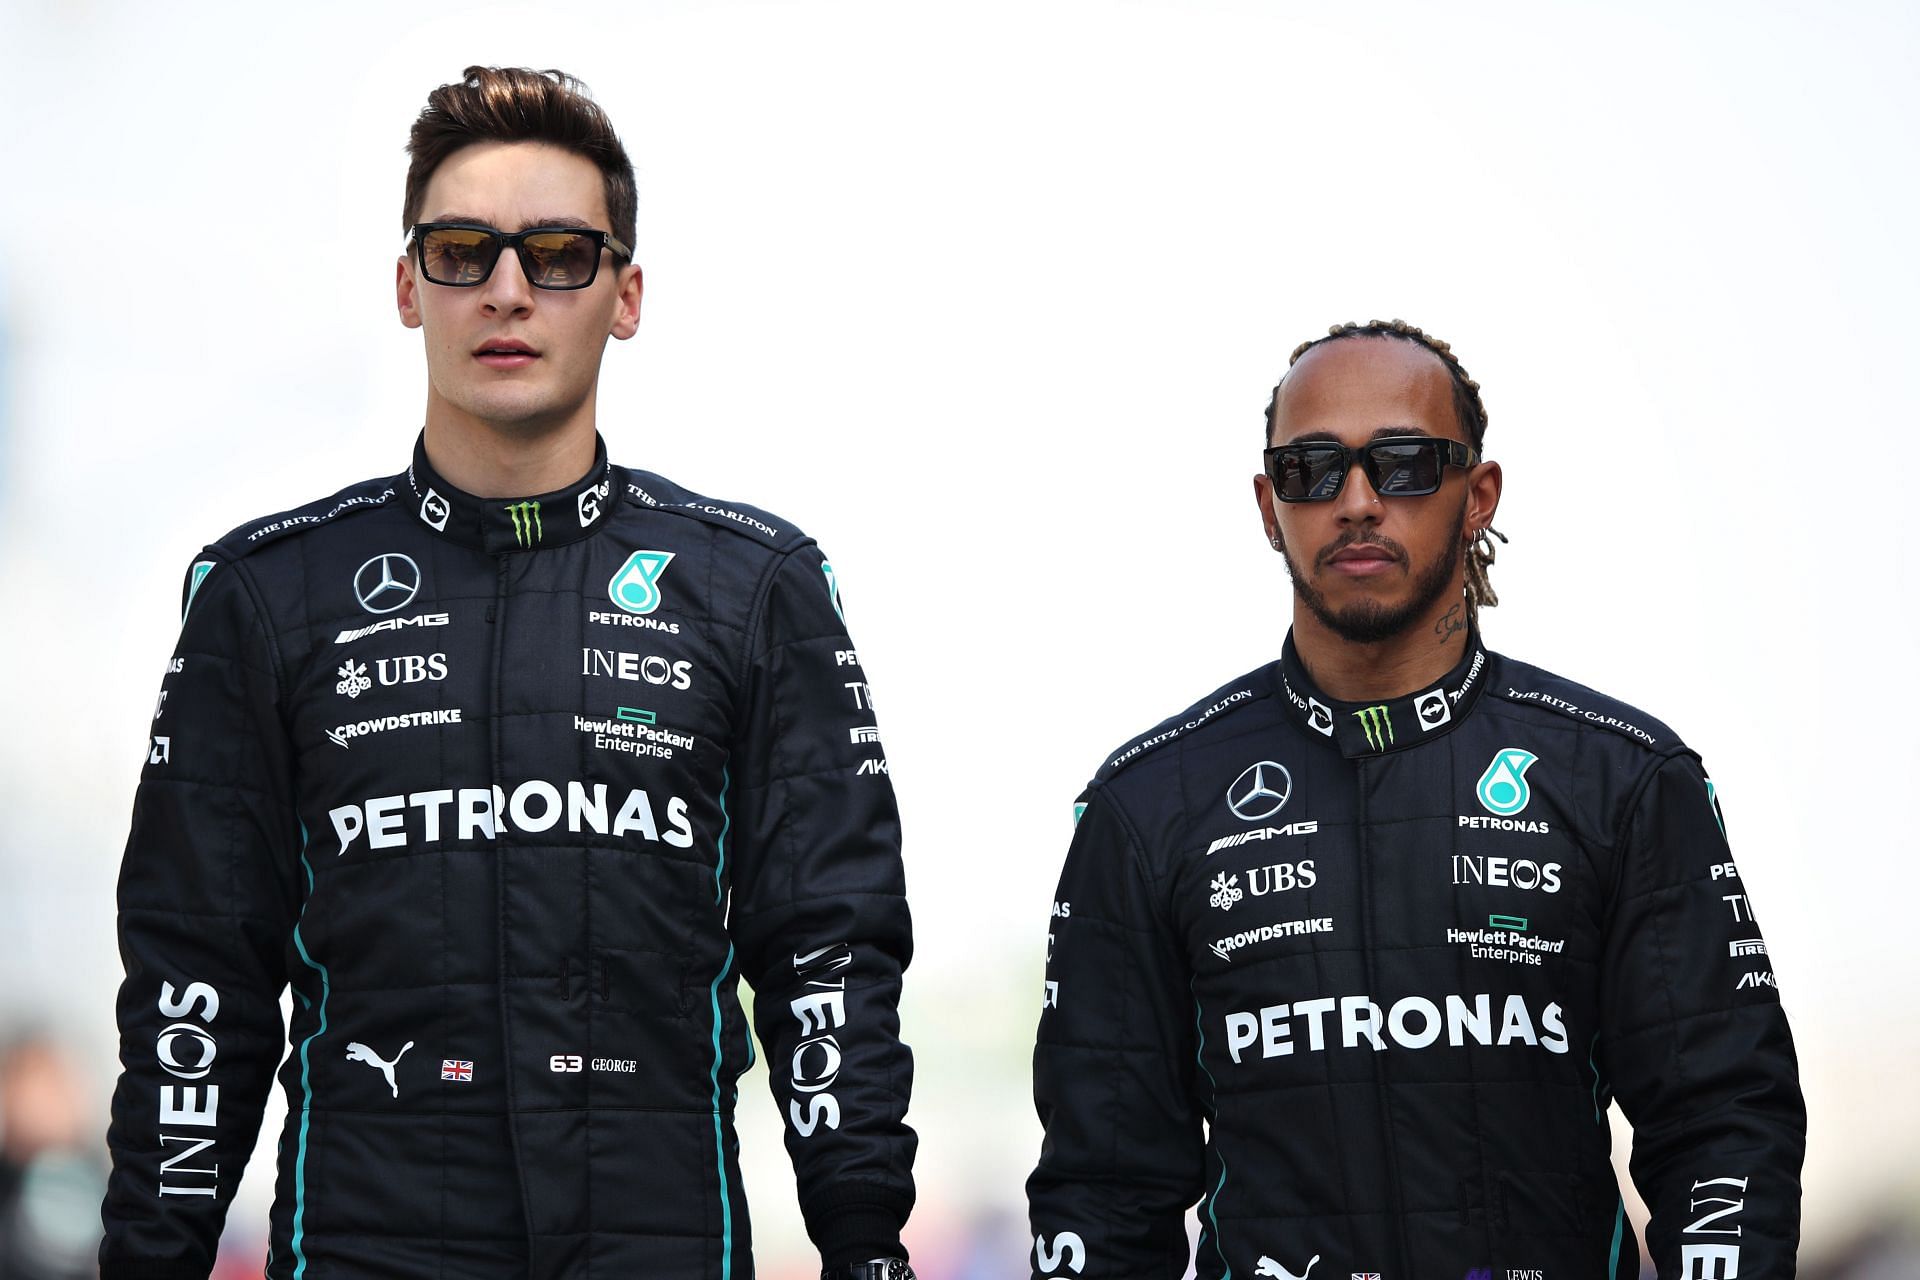 Lewis Hamilton only has positive things to say about his teammate for now